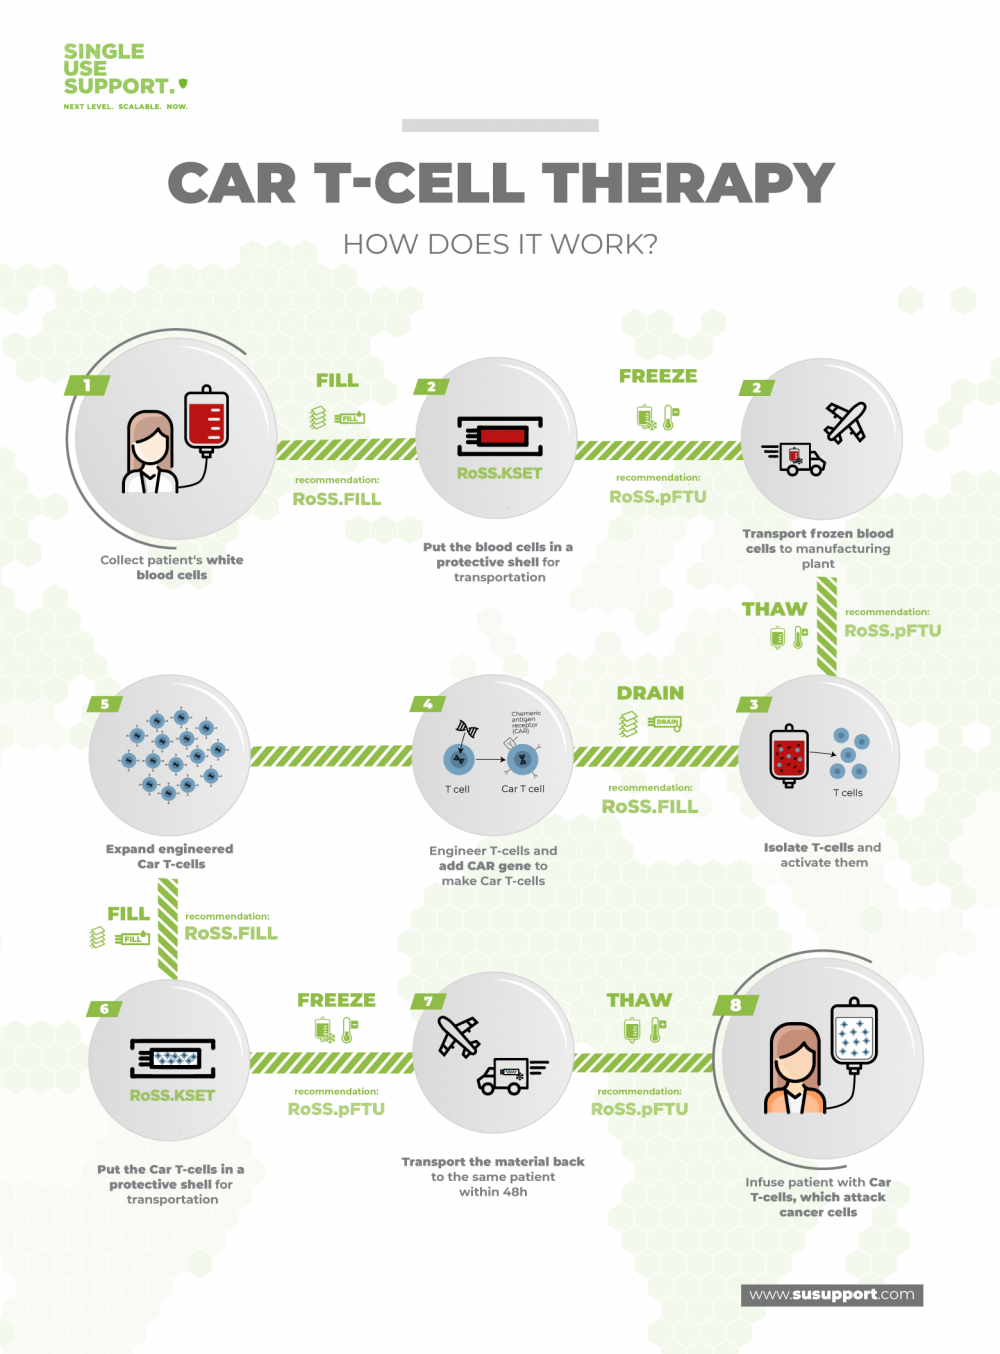 Success rate of a CAR Tcell therapy